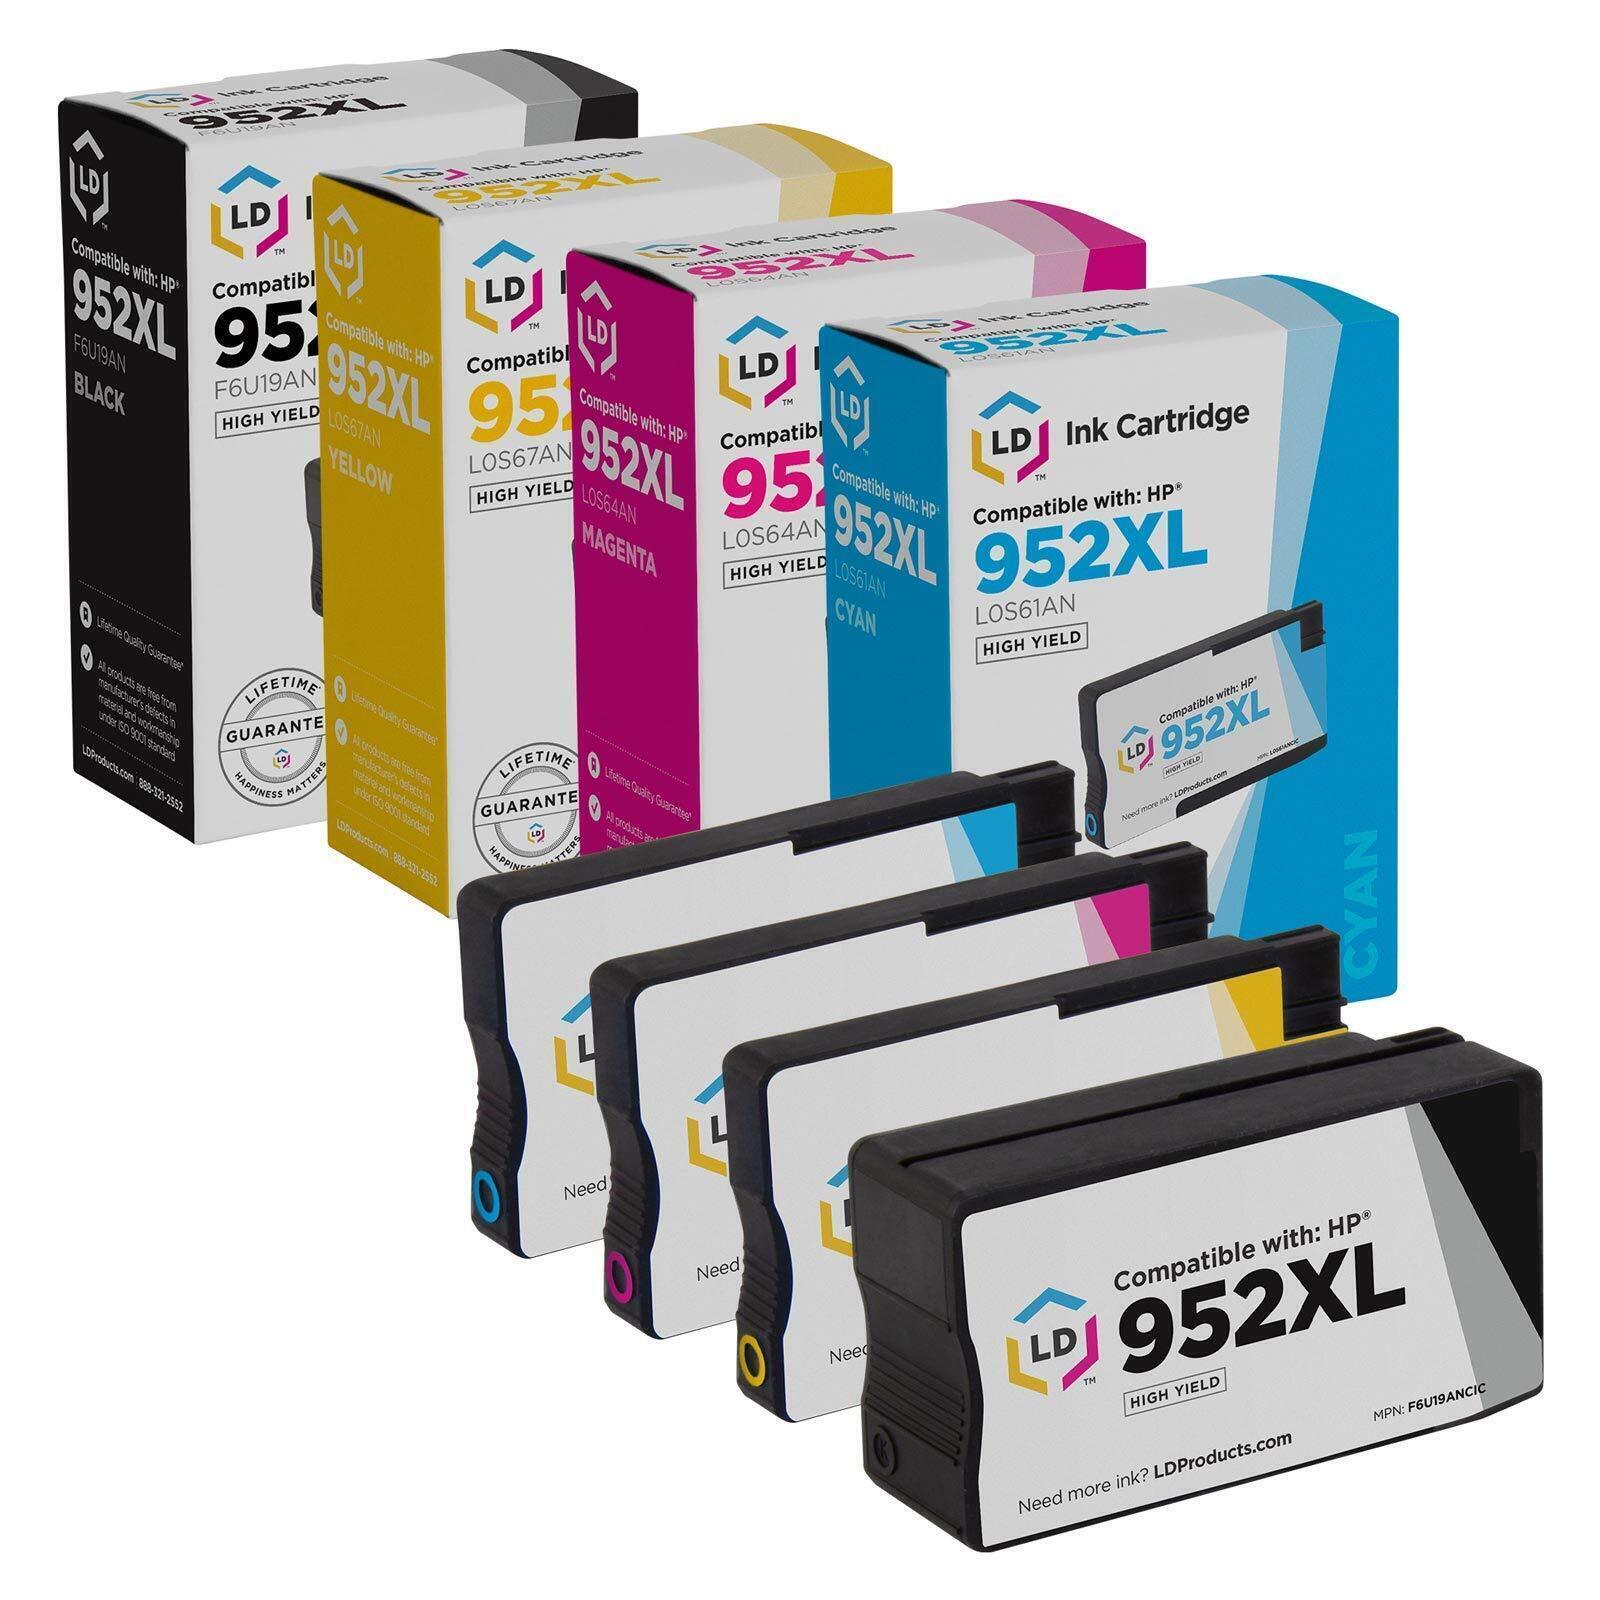 LD Products 4PK Reman Fits for HP 952XL Ink Cartridges Black Cyan Magenta Yellow